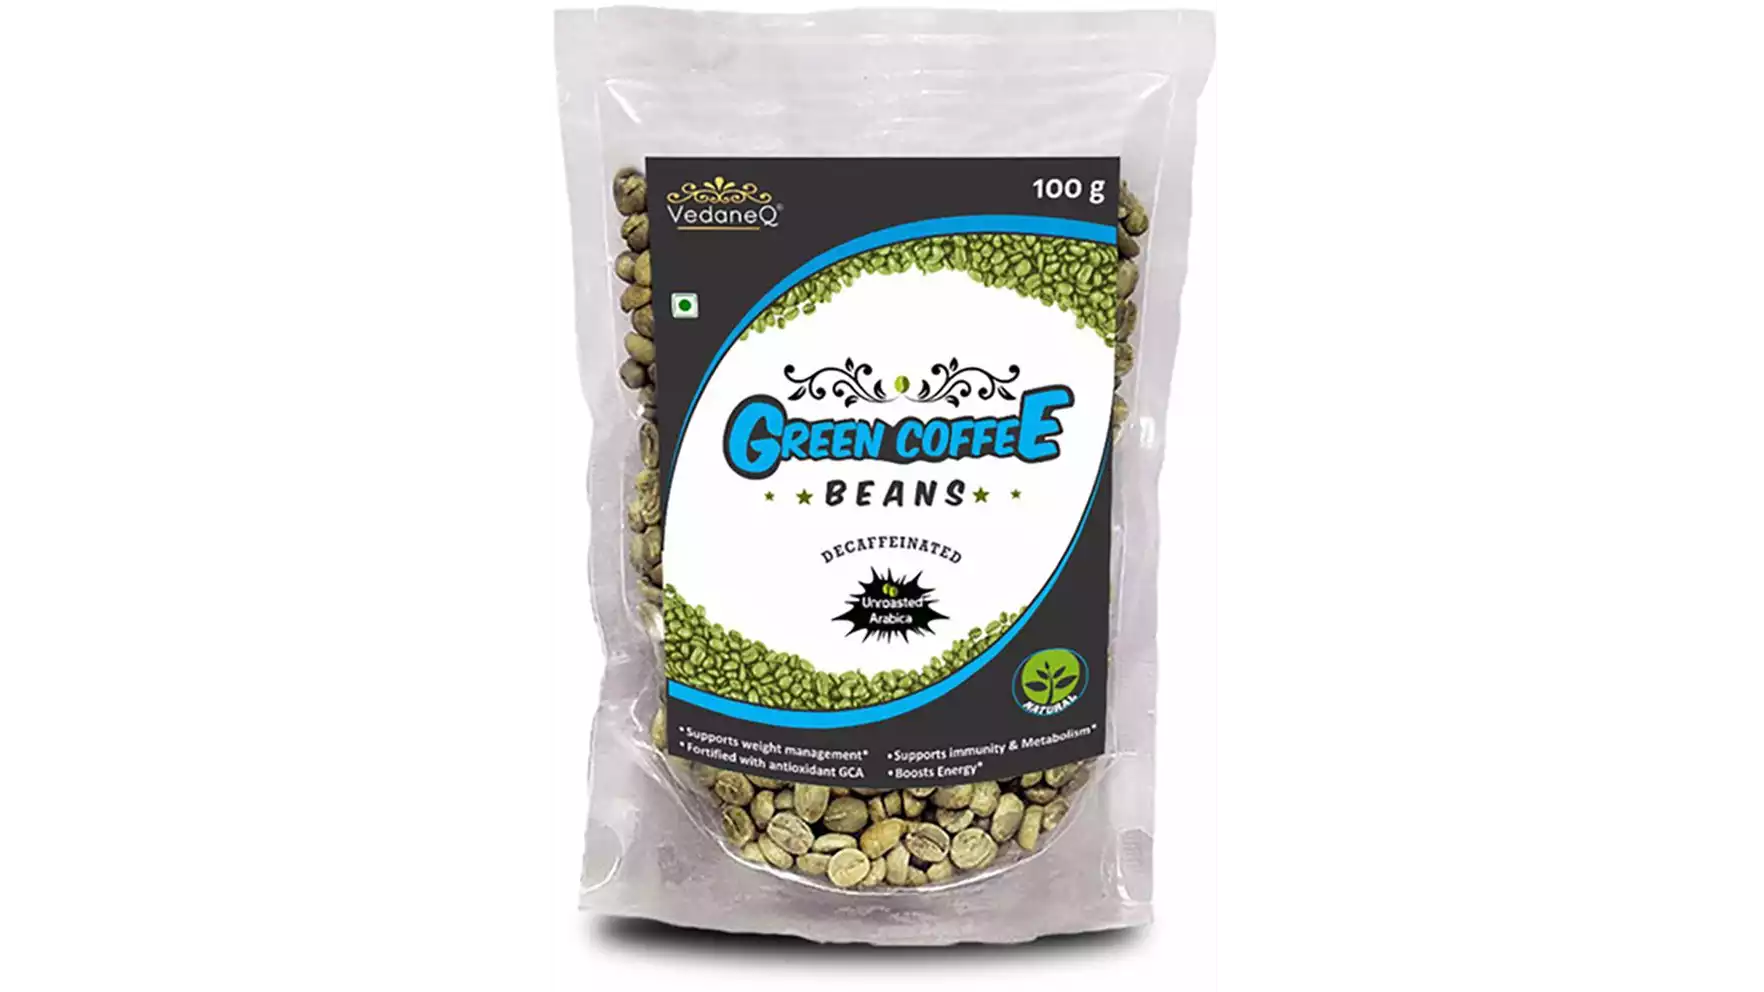 VedaneQ Green Coffee Beans Weight Loss Unroasted Arabica Instant Coffee (100g)